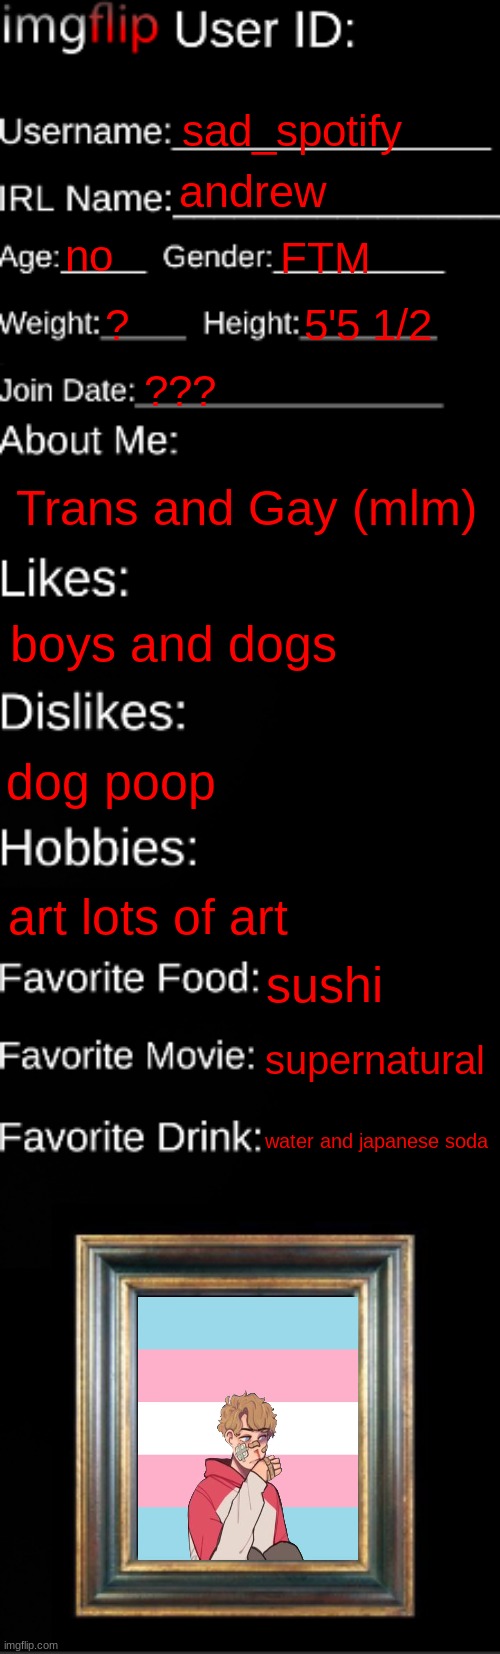 imgflip ID Card | sad_spotify; andrew; no; FTM; ? 5'5 1/2; ??? Trans and Gay (mlm); boys and dogs; dog poop; art lots of art; sushi; supernatural; water and japanese soda | image tagged in imgflip id card | made w/ Imgflip meme maker